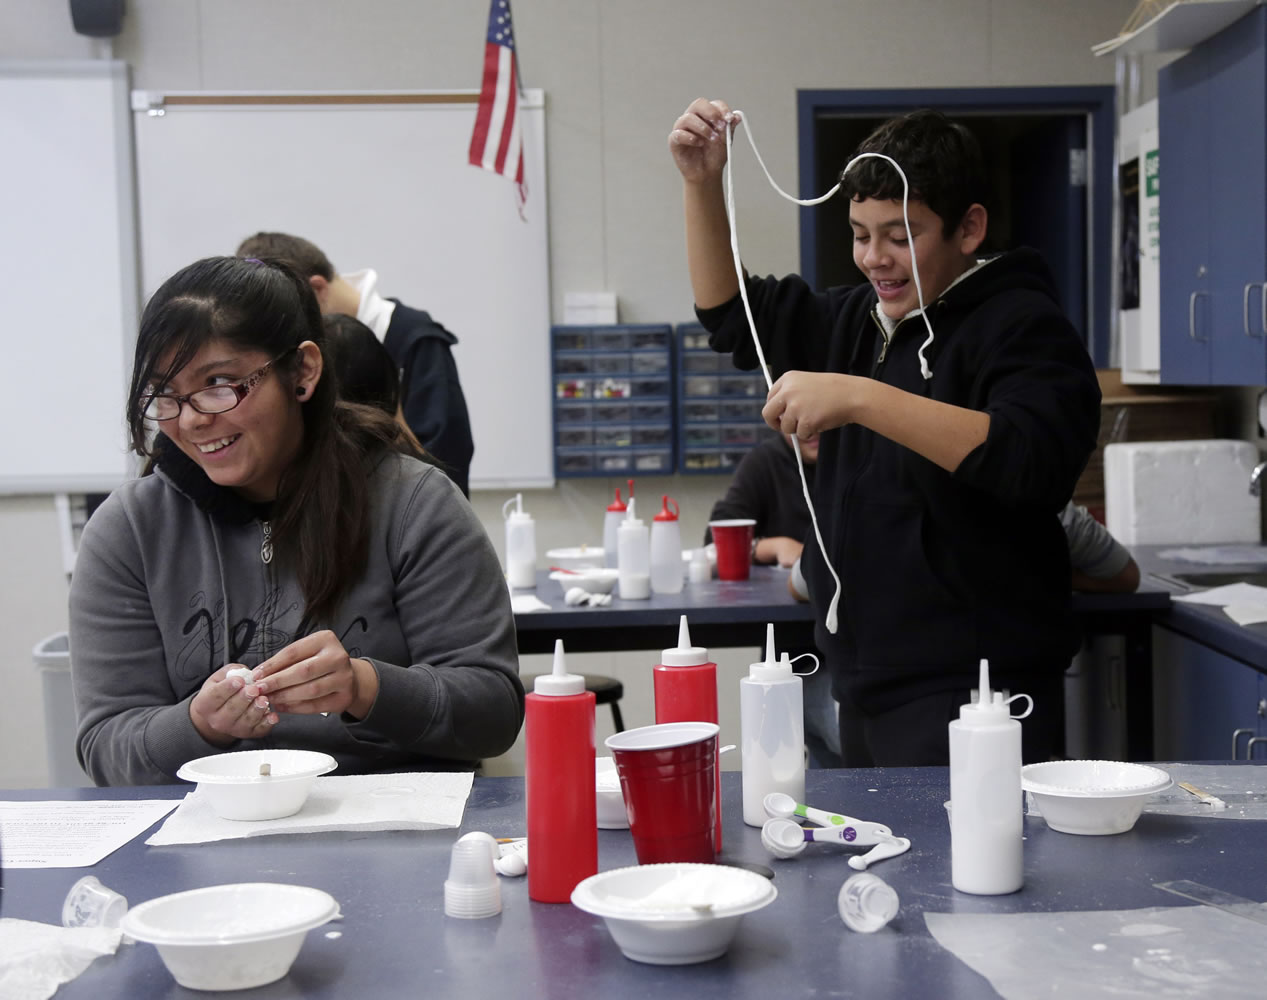 Claudia Morales, left, 13, jokes with classmate Chris Rocha during a science class this month at Palo Verde Union School in Tulare, Calif.